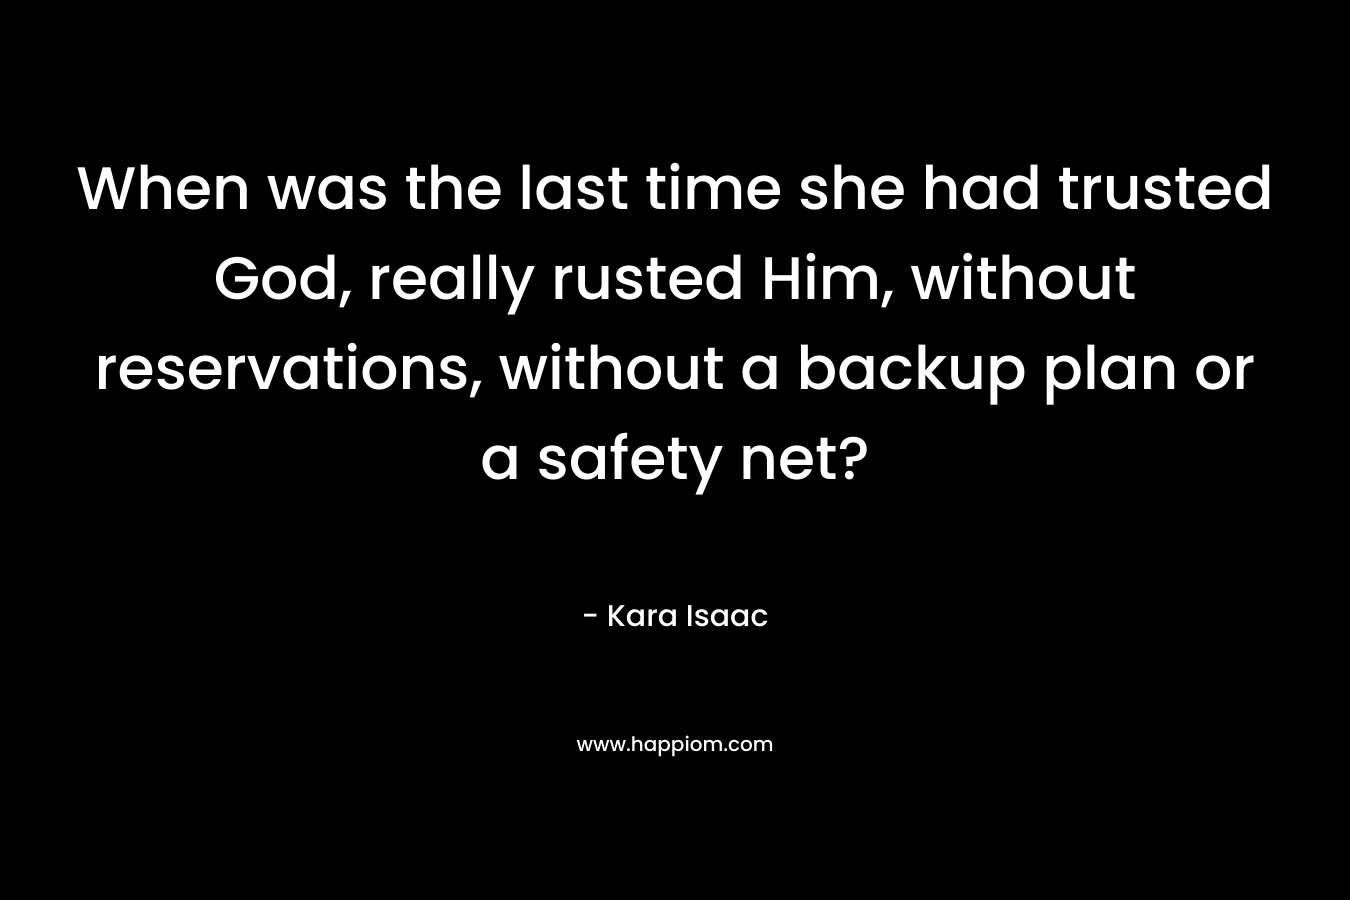 When was the last time she had trusted God, really rusted Him, without reservations, without a backup plan or a safety net? – Kara Isaac